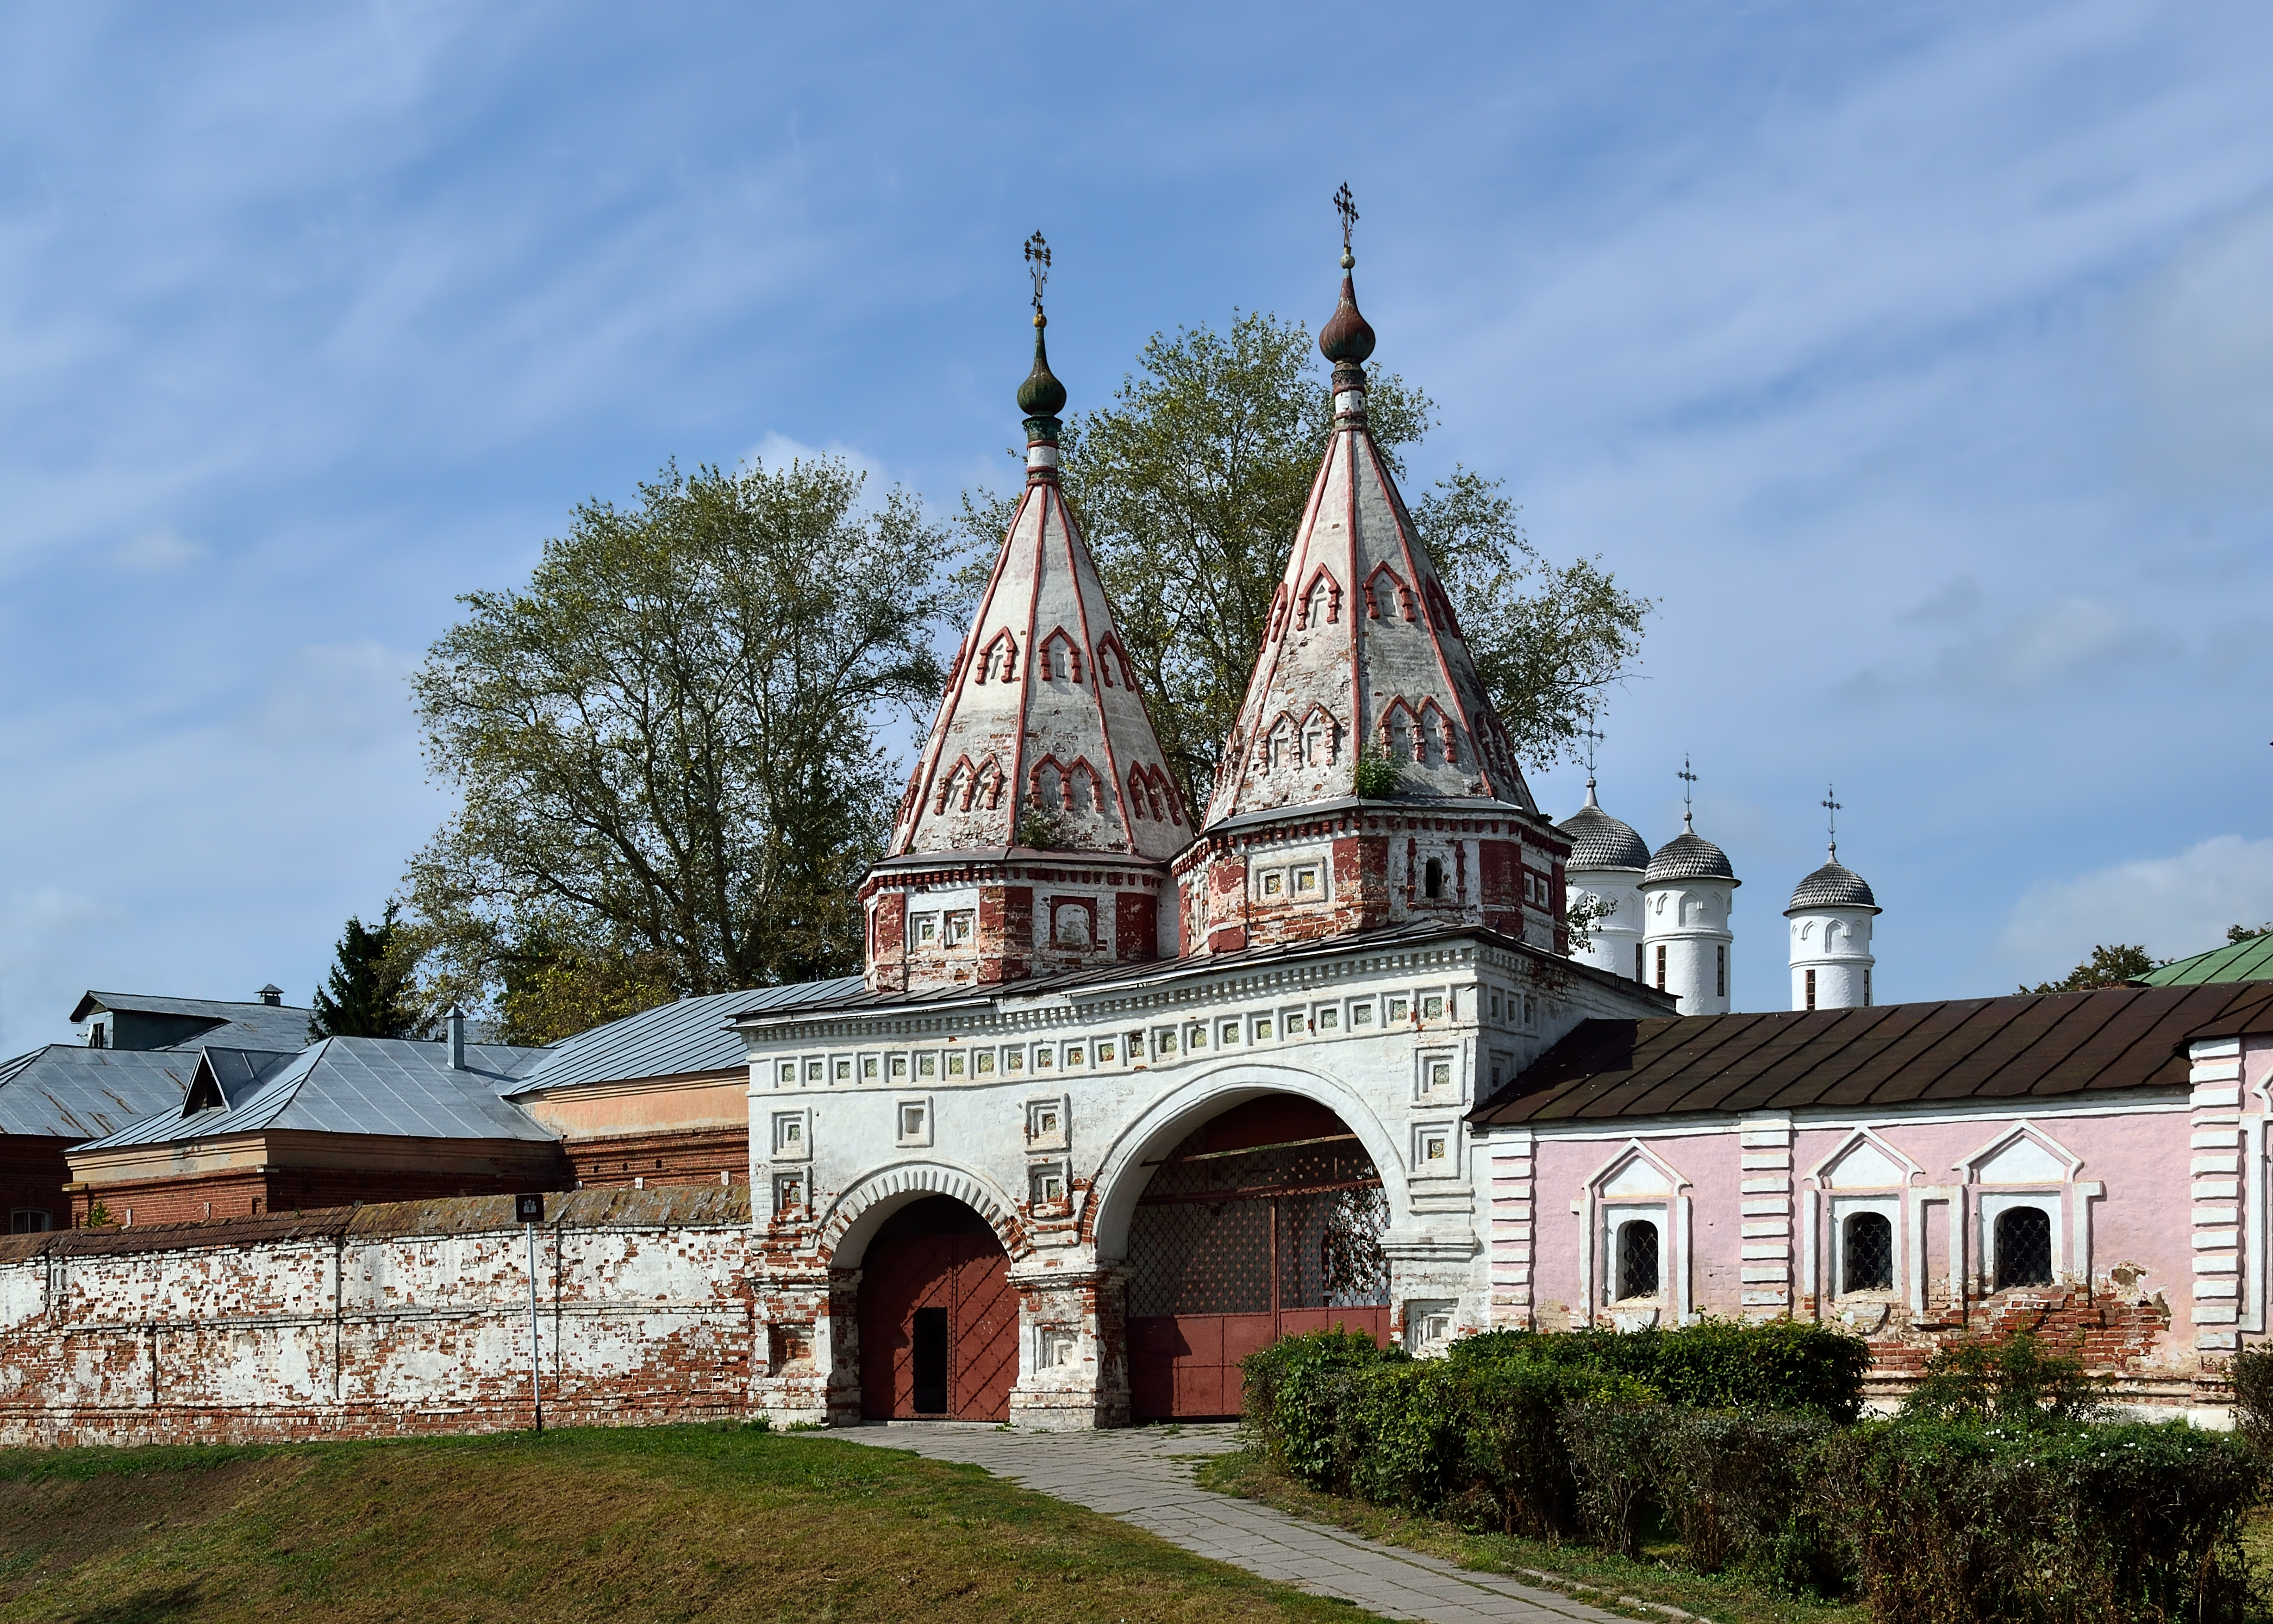 Holy Gate at Rizopolozhensky Convent in Suzdal